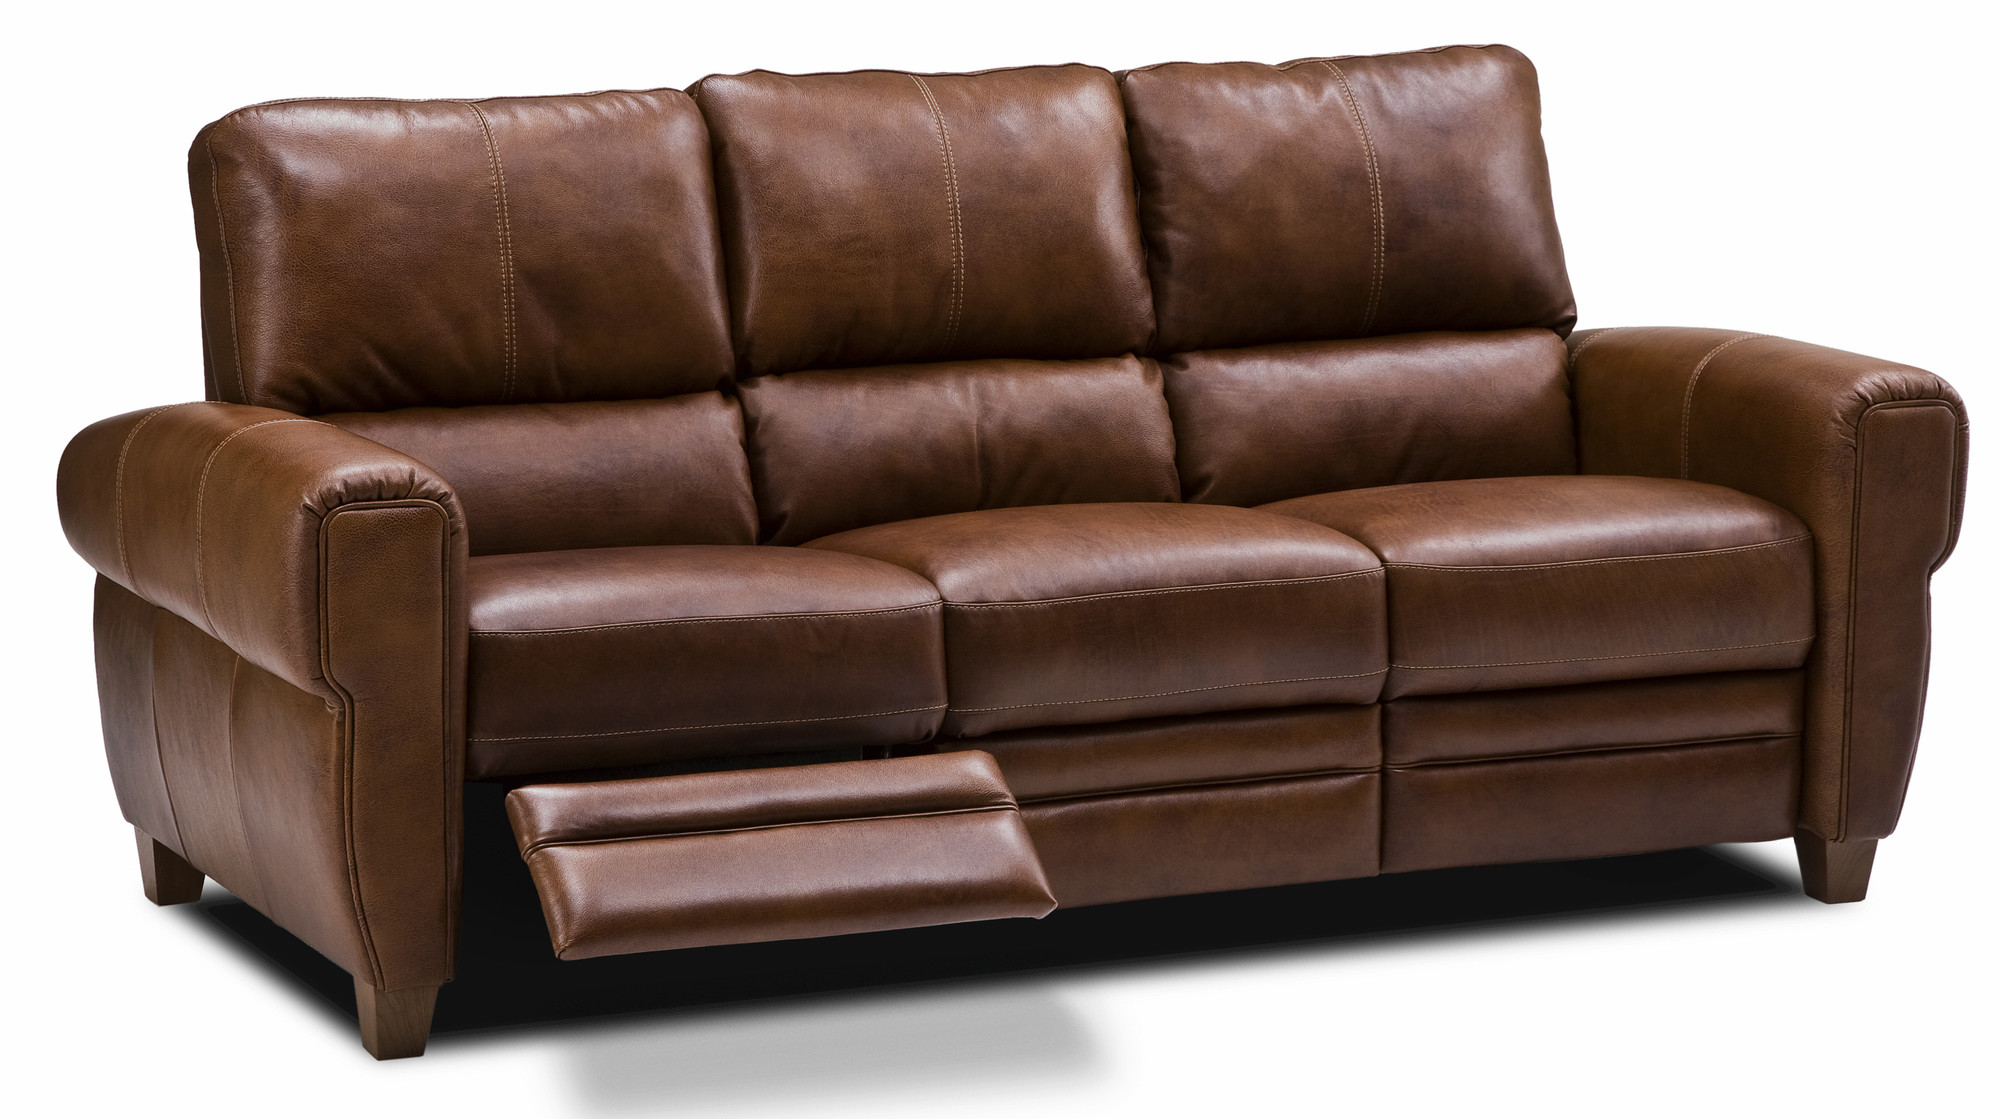 Leather Sectional Sofa Bed Recliner 2 2359 